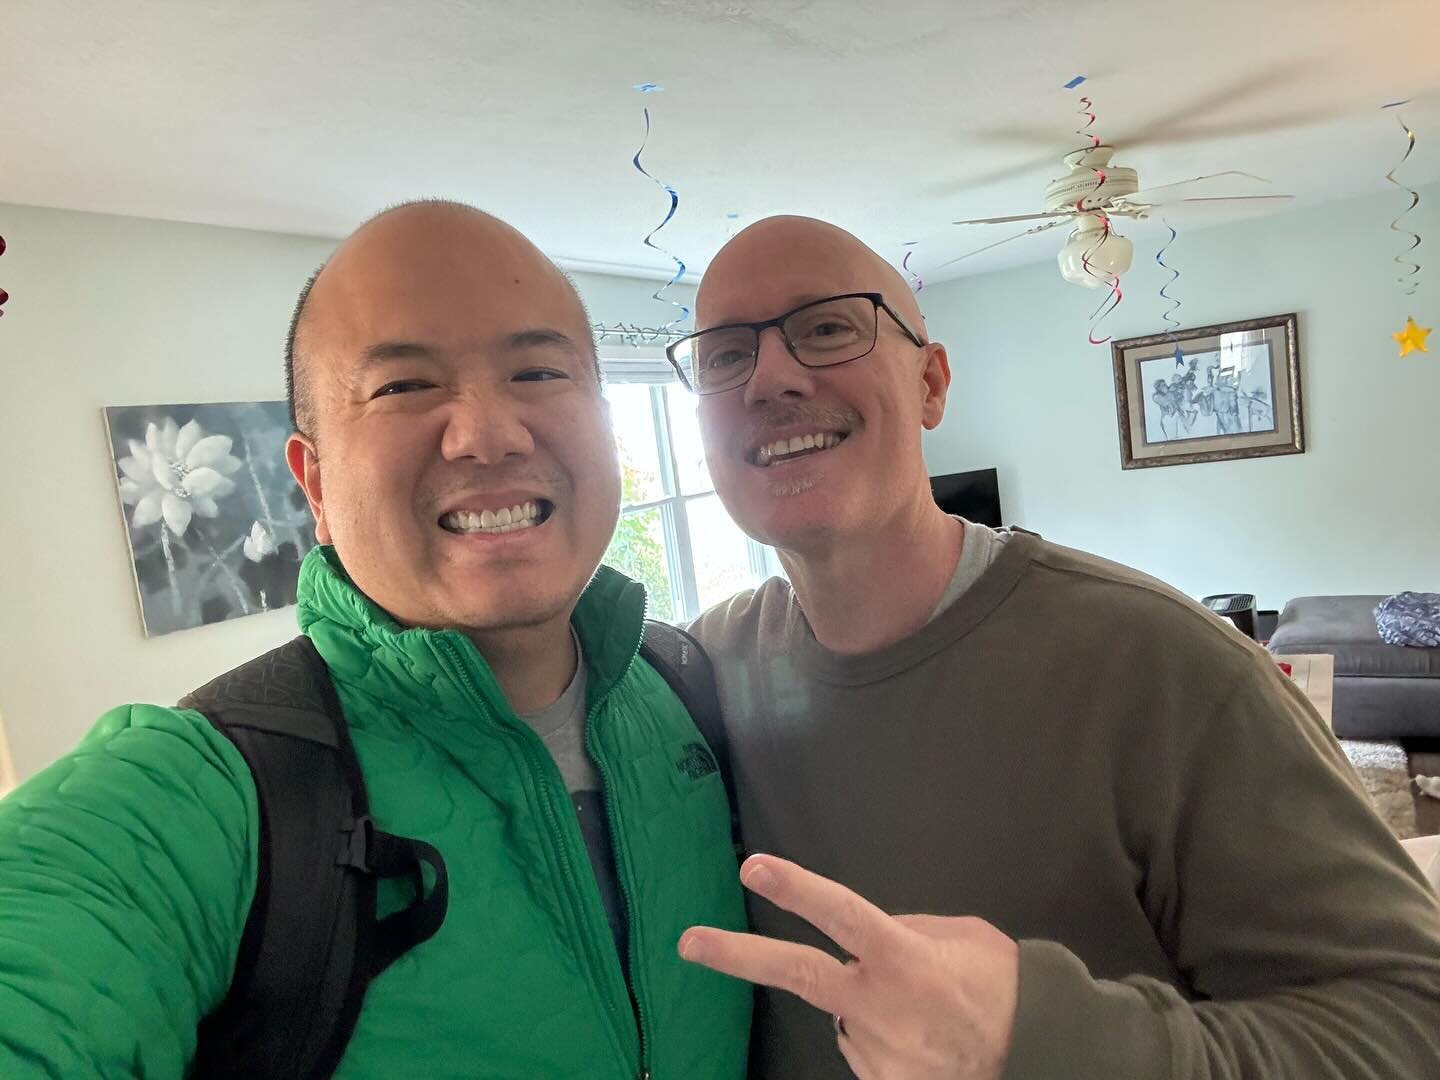 Album Recording got moved, so I had the time to work on myself and have a couple voice lessons (prepping for another album , P&amp;P, and Carmen) with the #godtier voice teacher @gill_mindful_voice_training (he also let me observe classes and other l